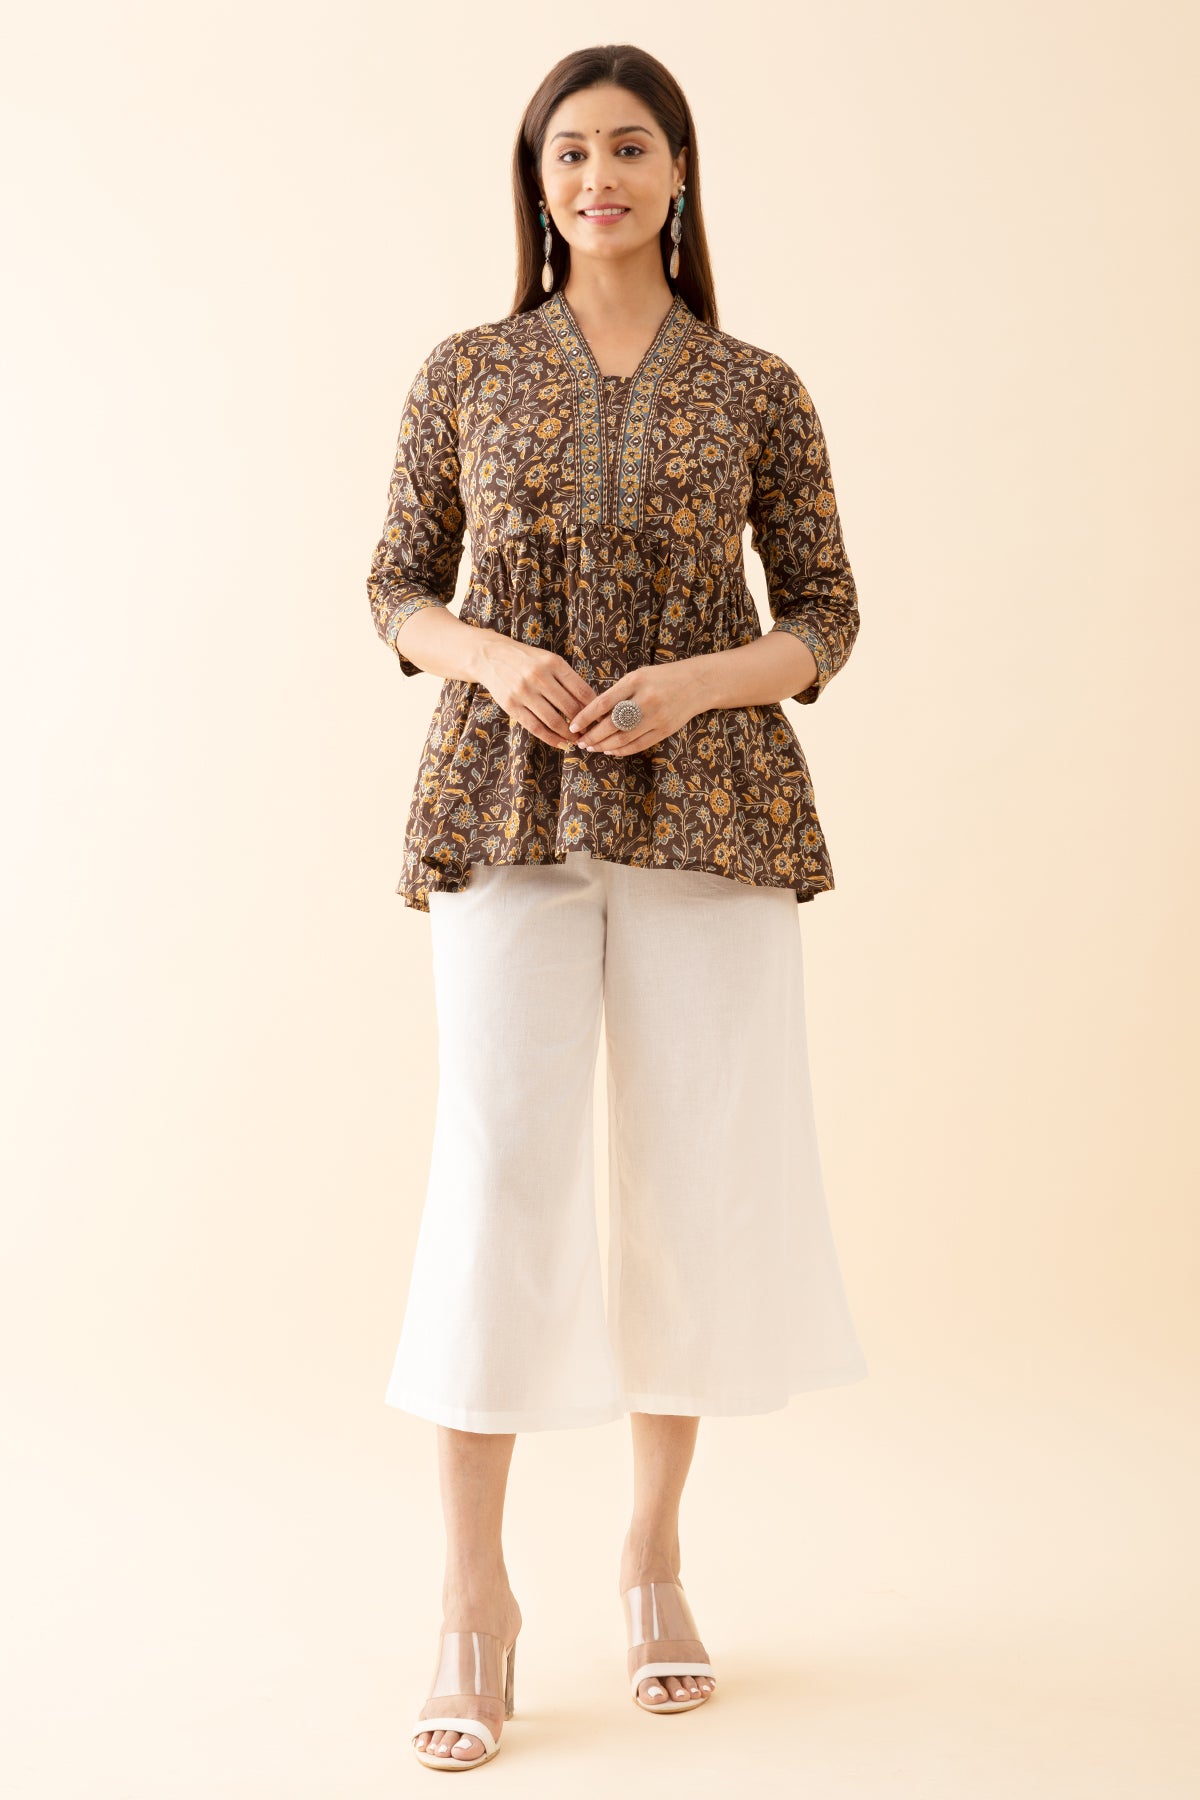 Floral Printed Tunic with Foil Mirror Embeliishments Brown